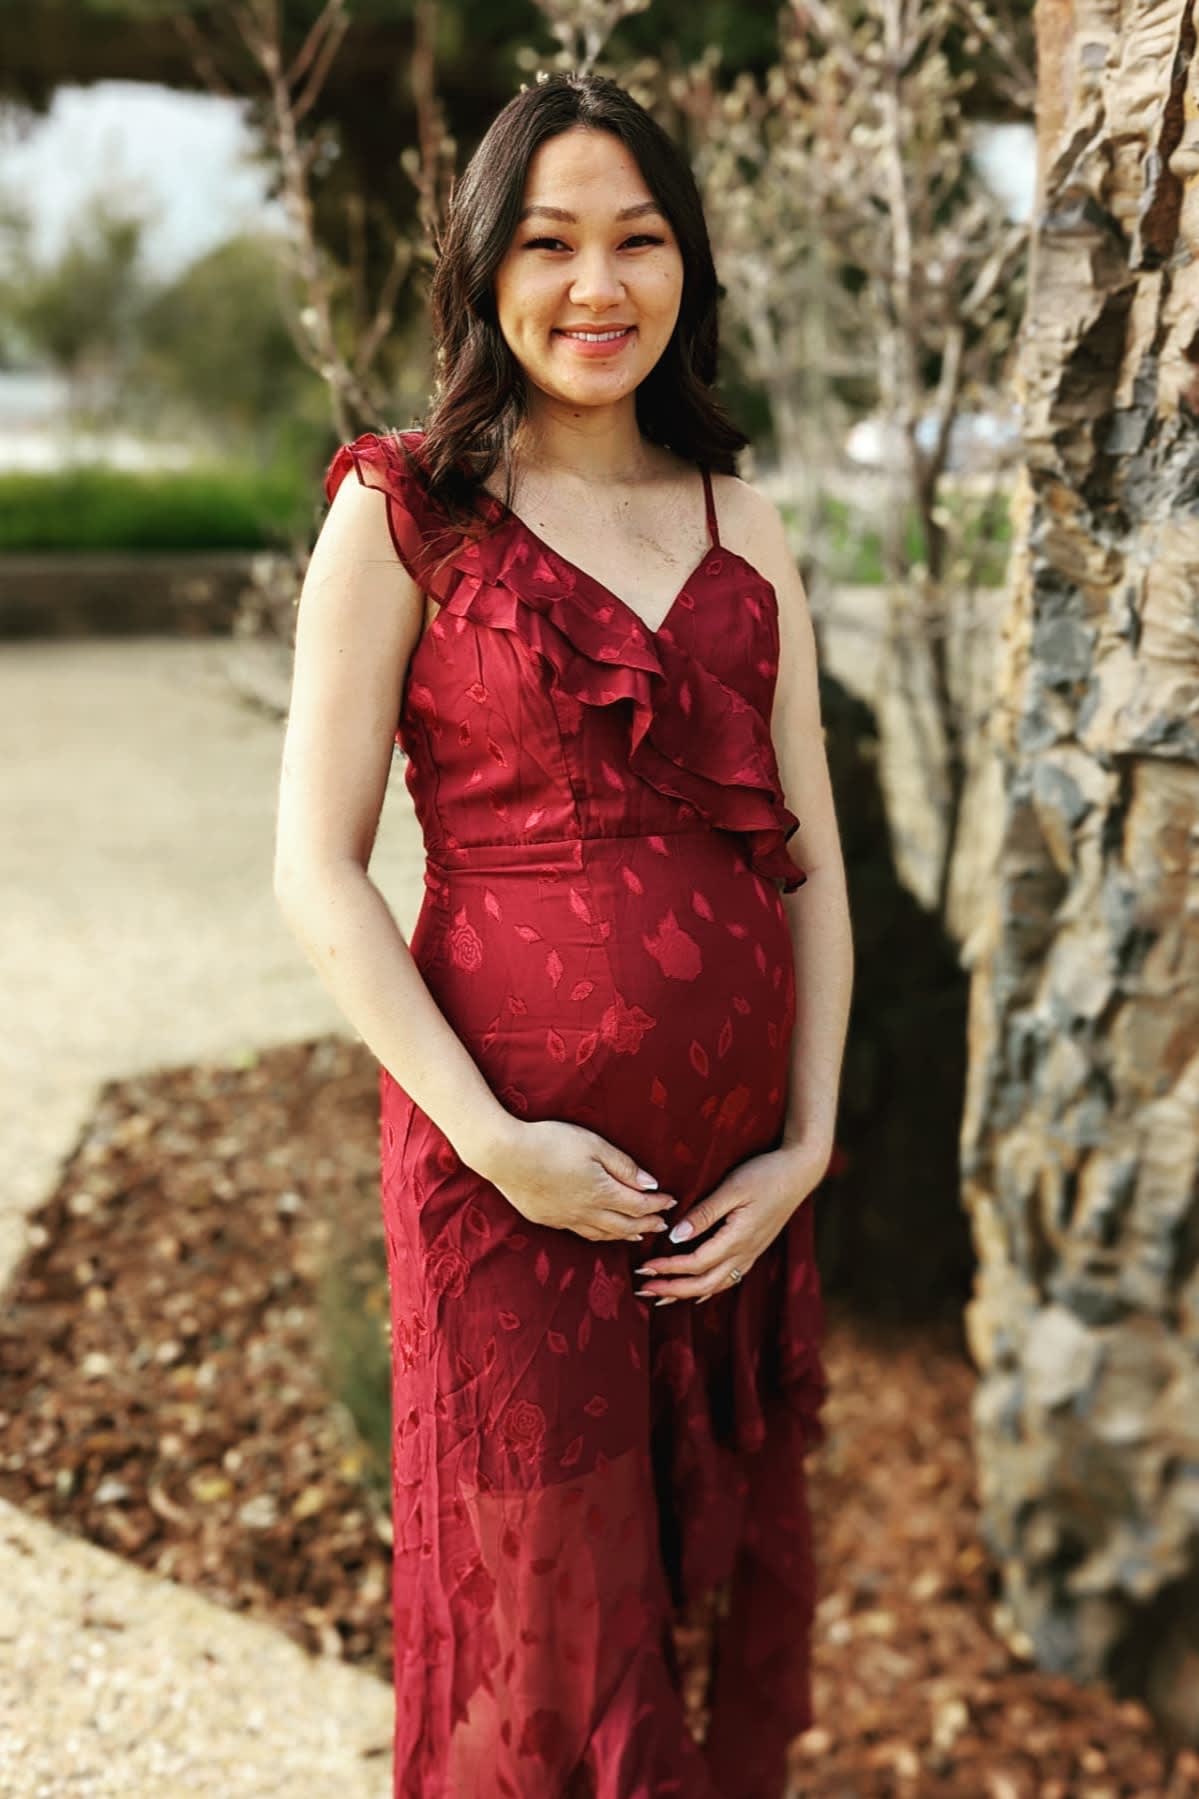 Styling The Bump: Fashion Guide To Your Maternity Photoshoot